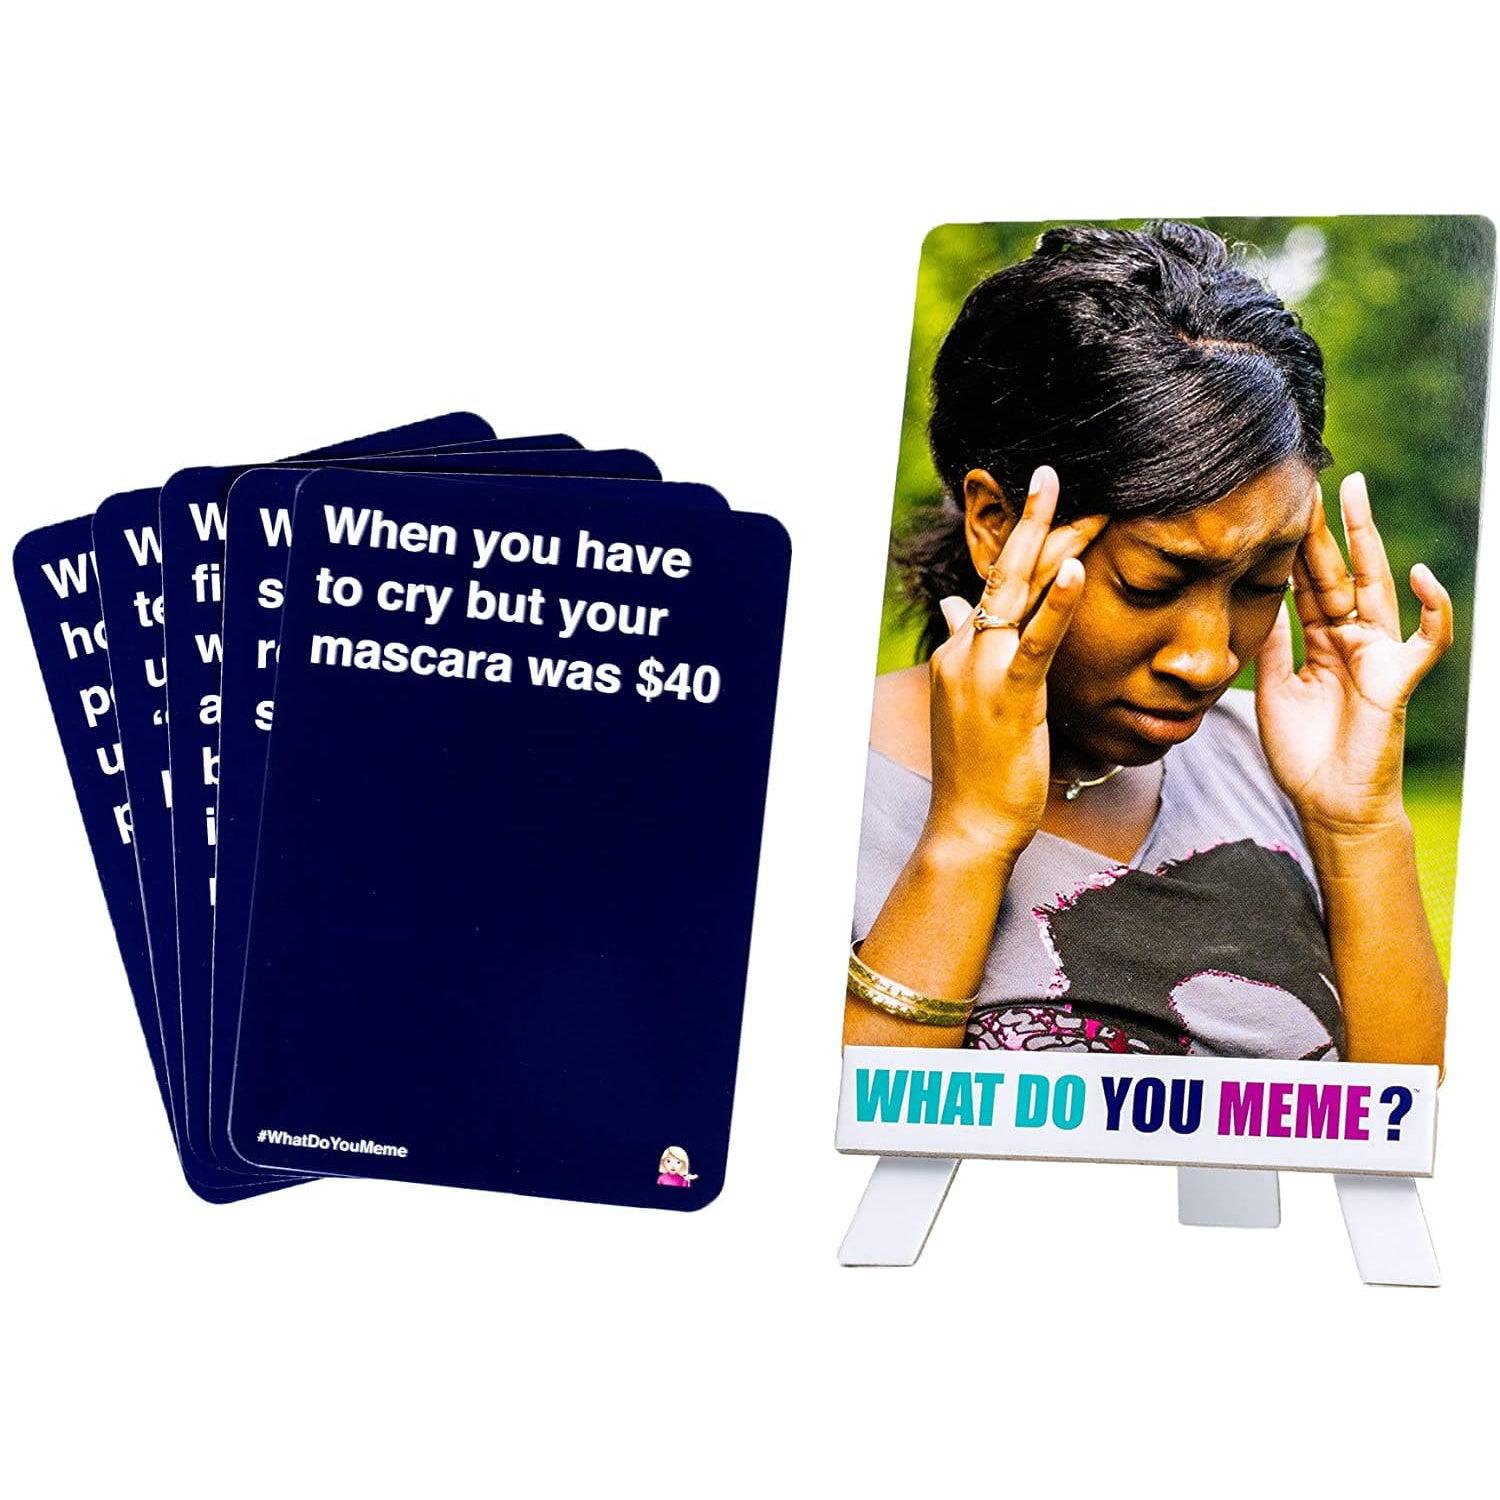 What Do You Meme-What Do You Meme? Basic Expansion Pack-BP204-Legacy Toys